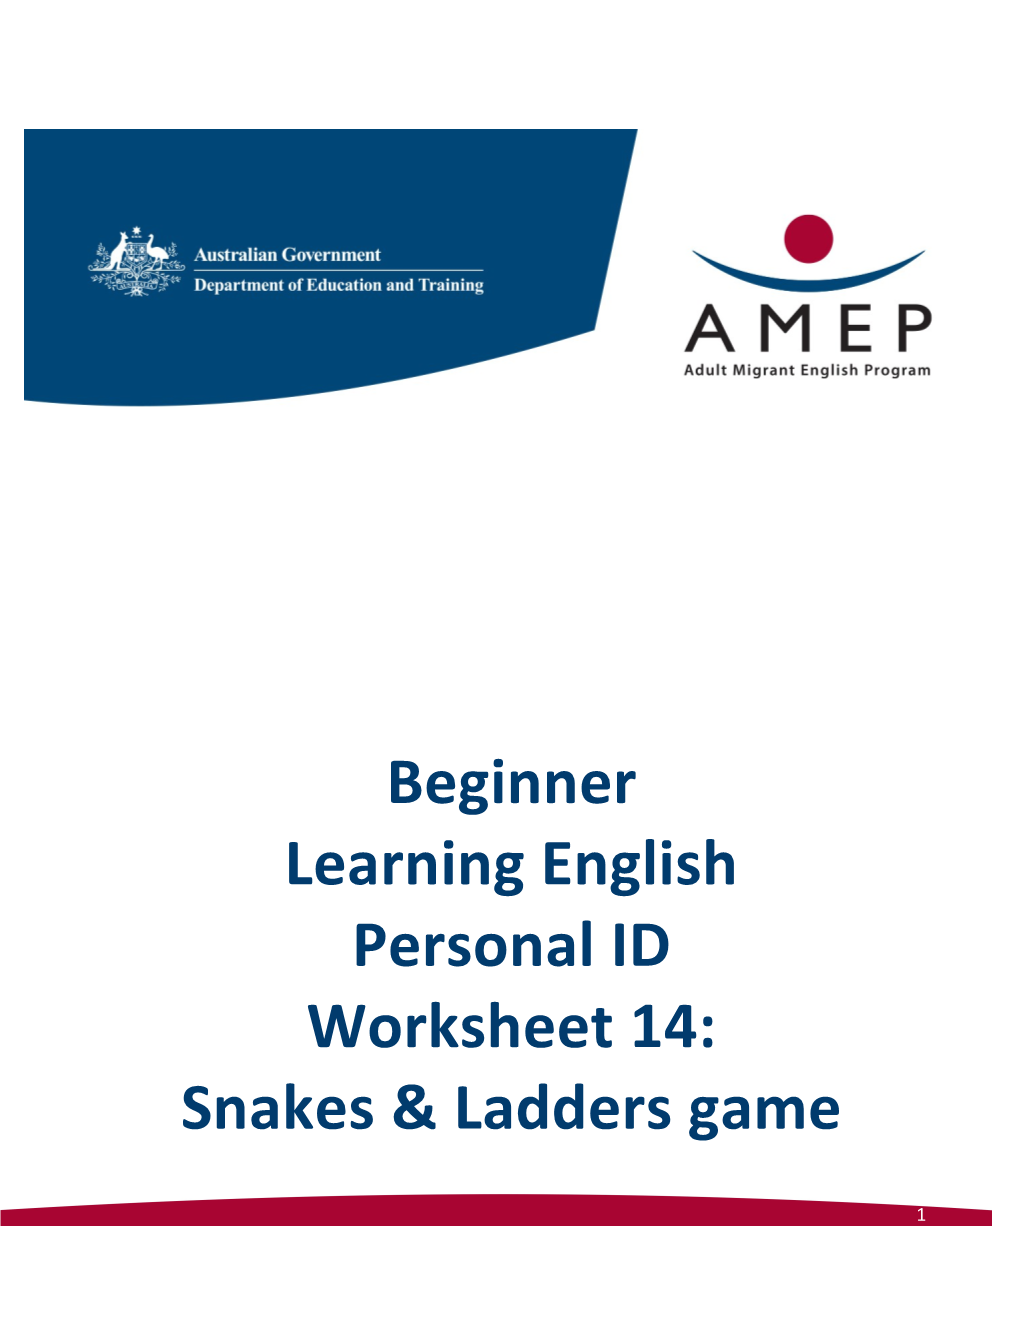 Beginner Learning English Personal ID Worksheet 14: Snakes & Ladders Game